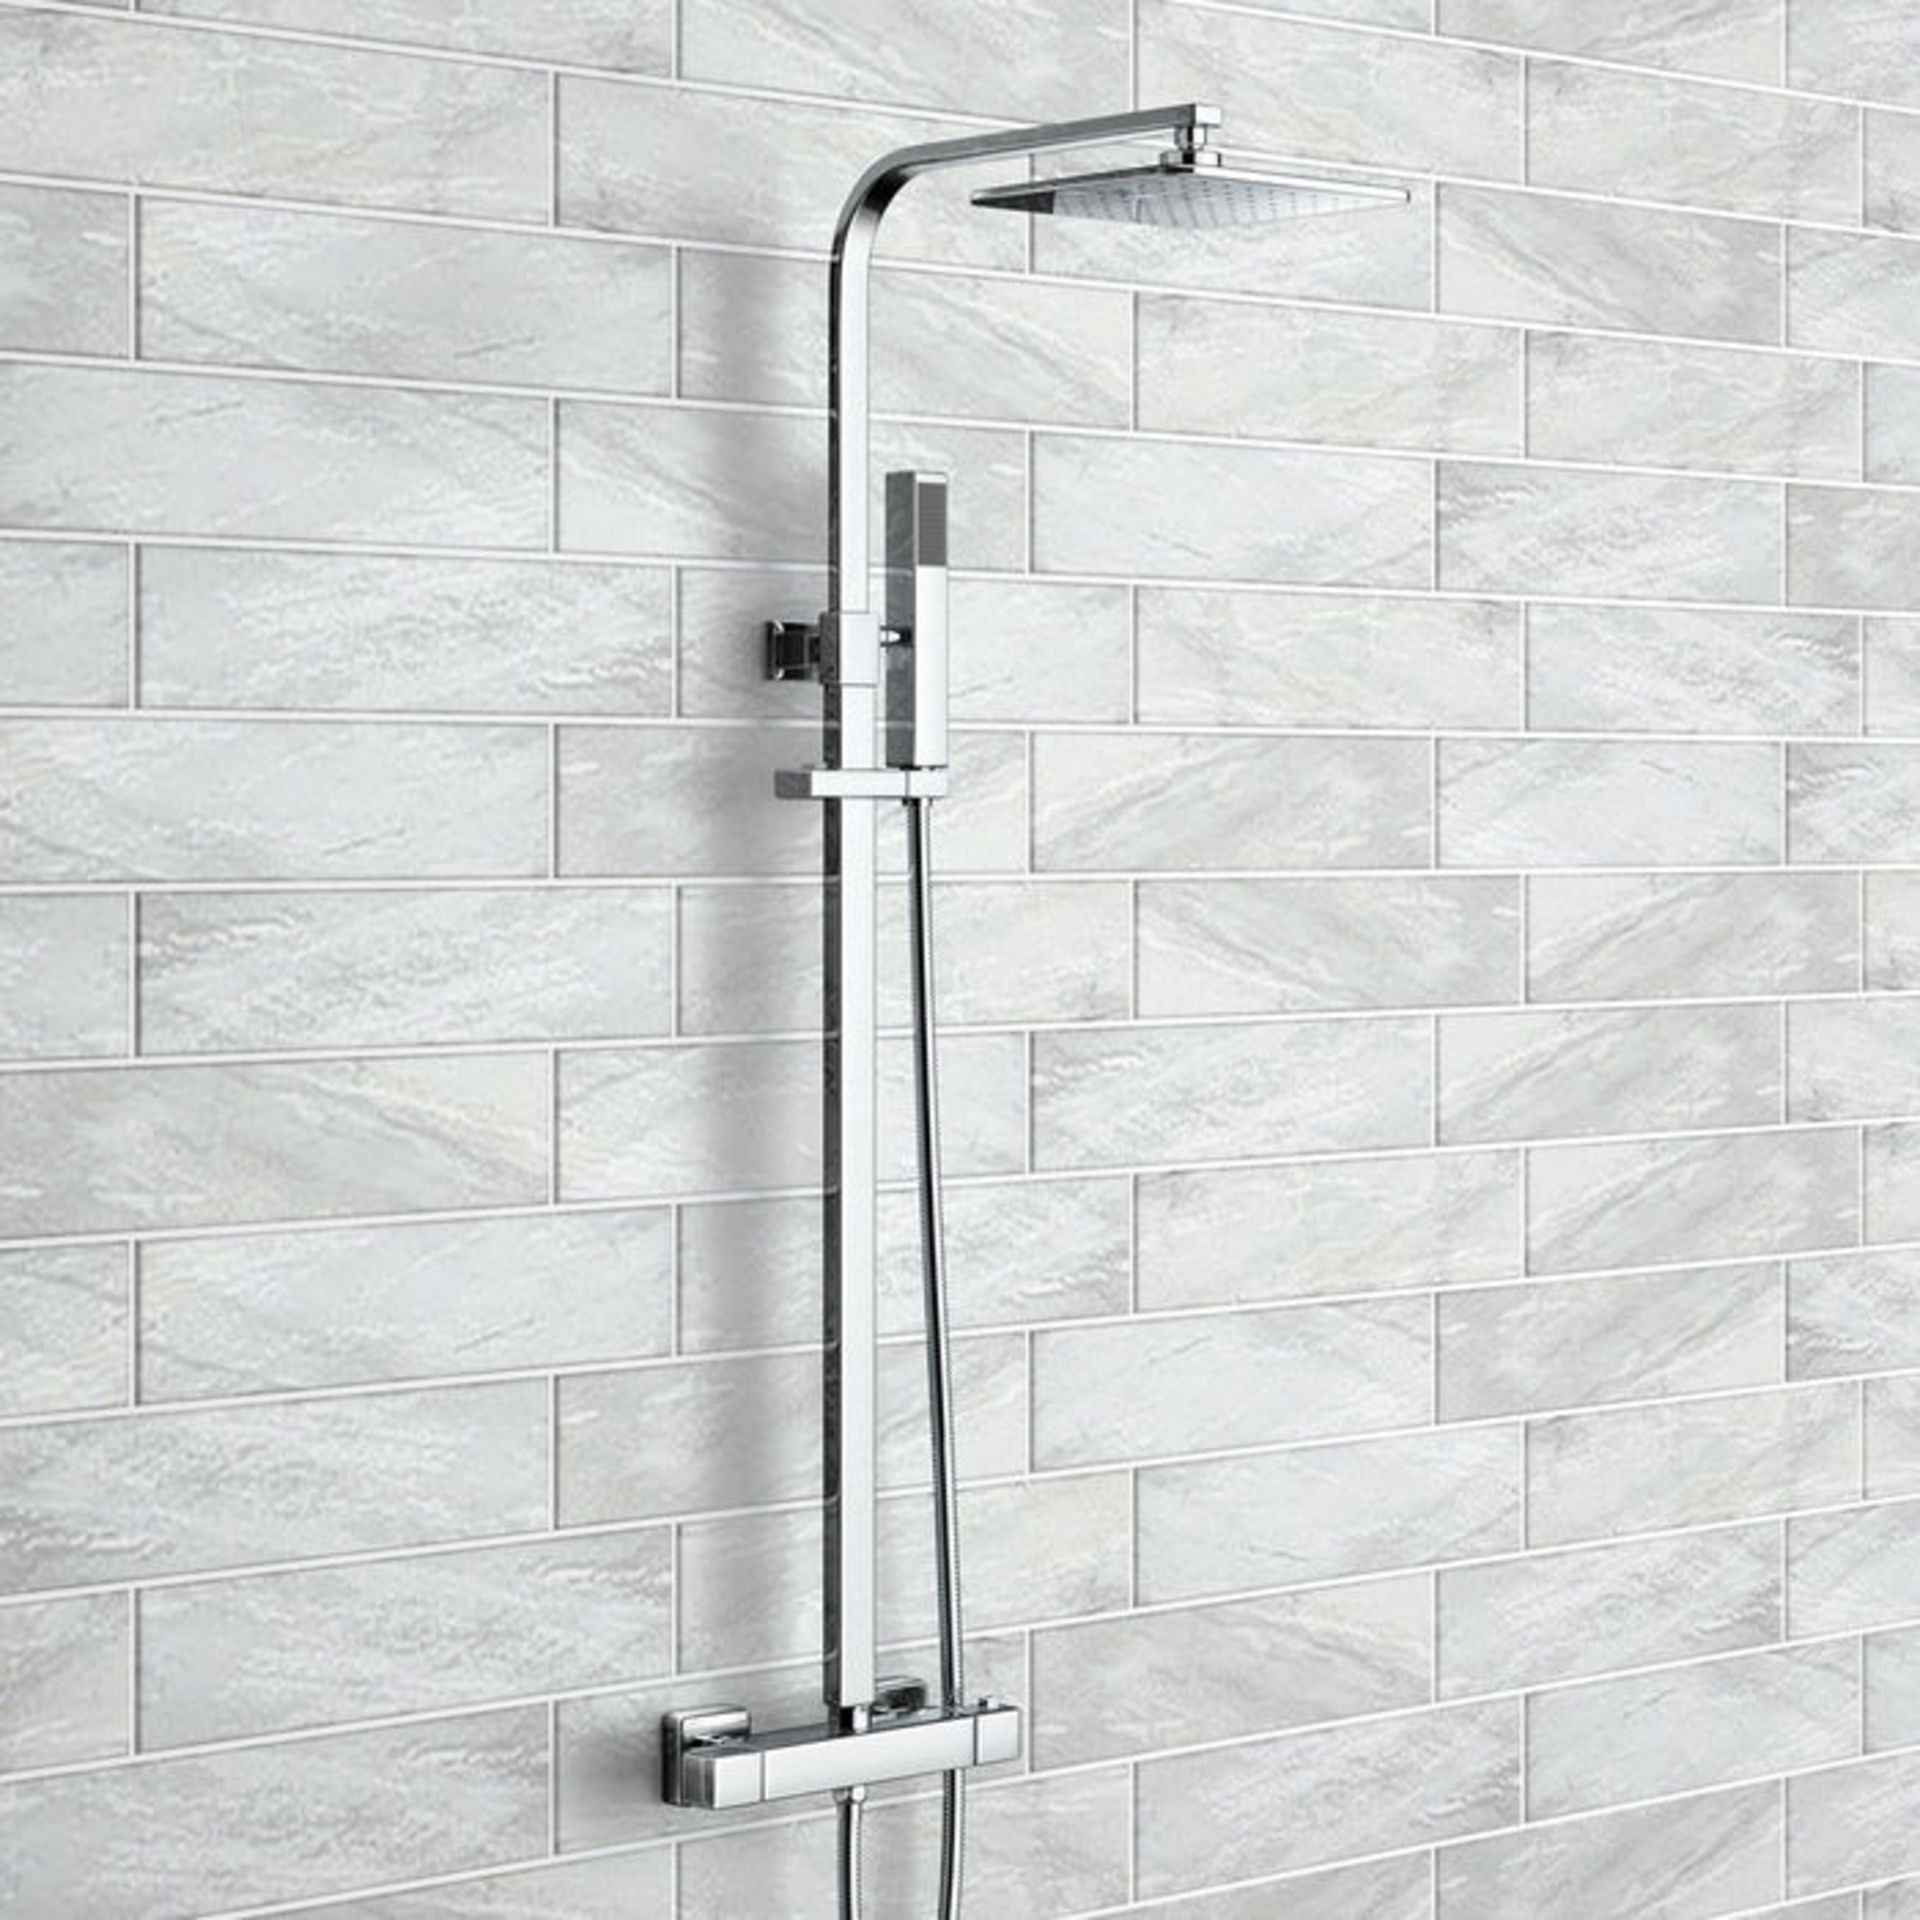 (UK261) Square Exposed Thermostatic Shower Kit & Medium Head. Angled slim and on-trend aesthetic - Image 3 of 3